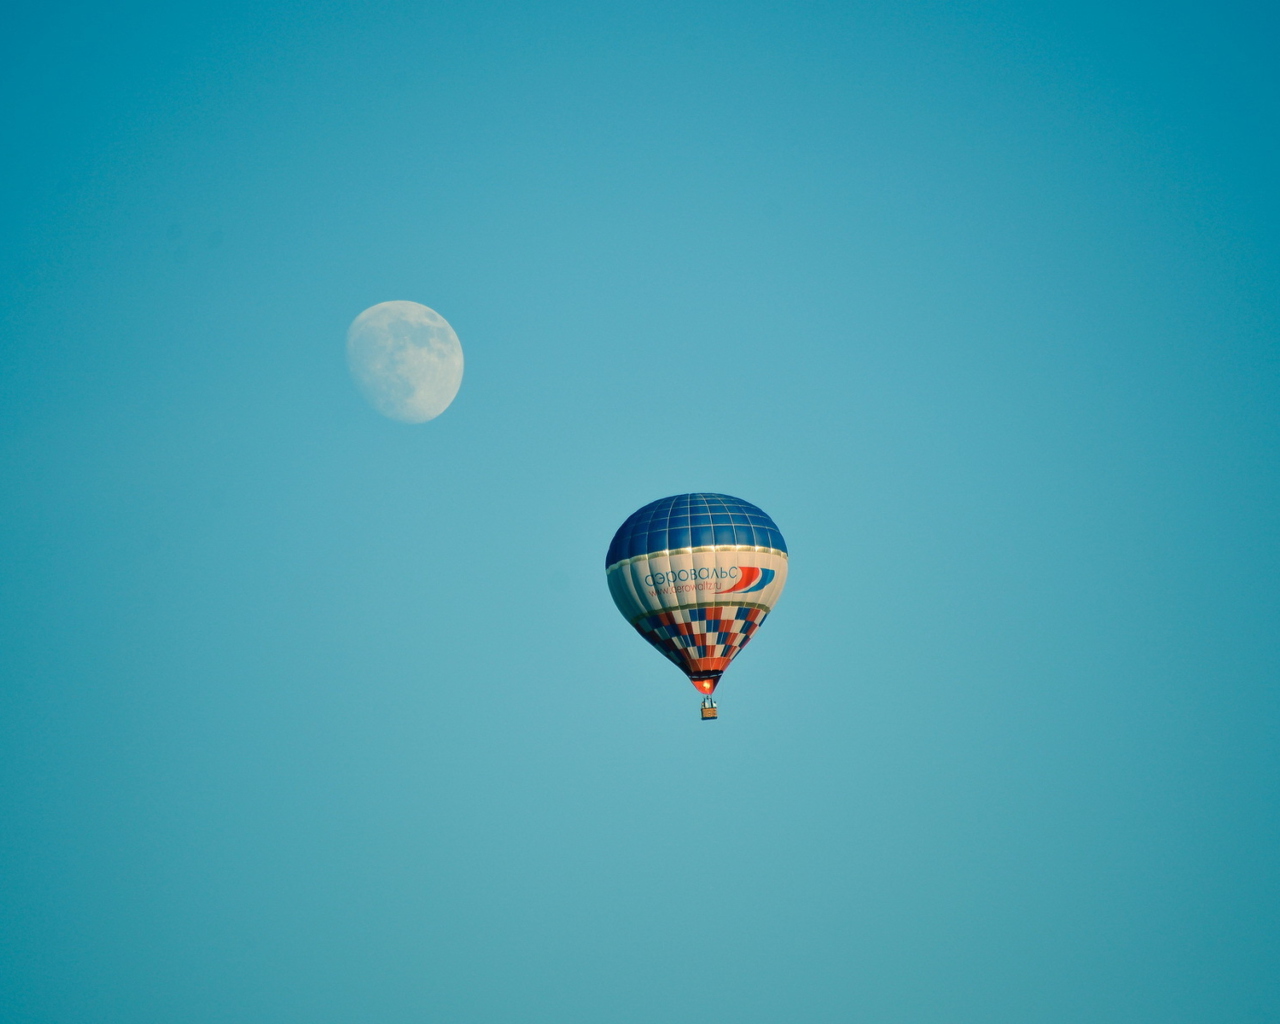 Das Air Balloon In Blue Sky In Front Of White Moon Wallpaper 1280x1024